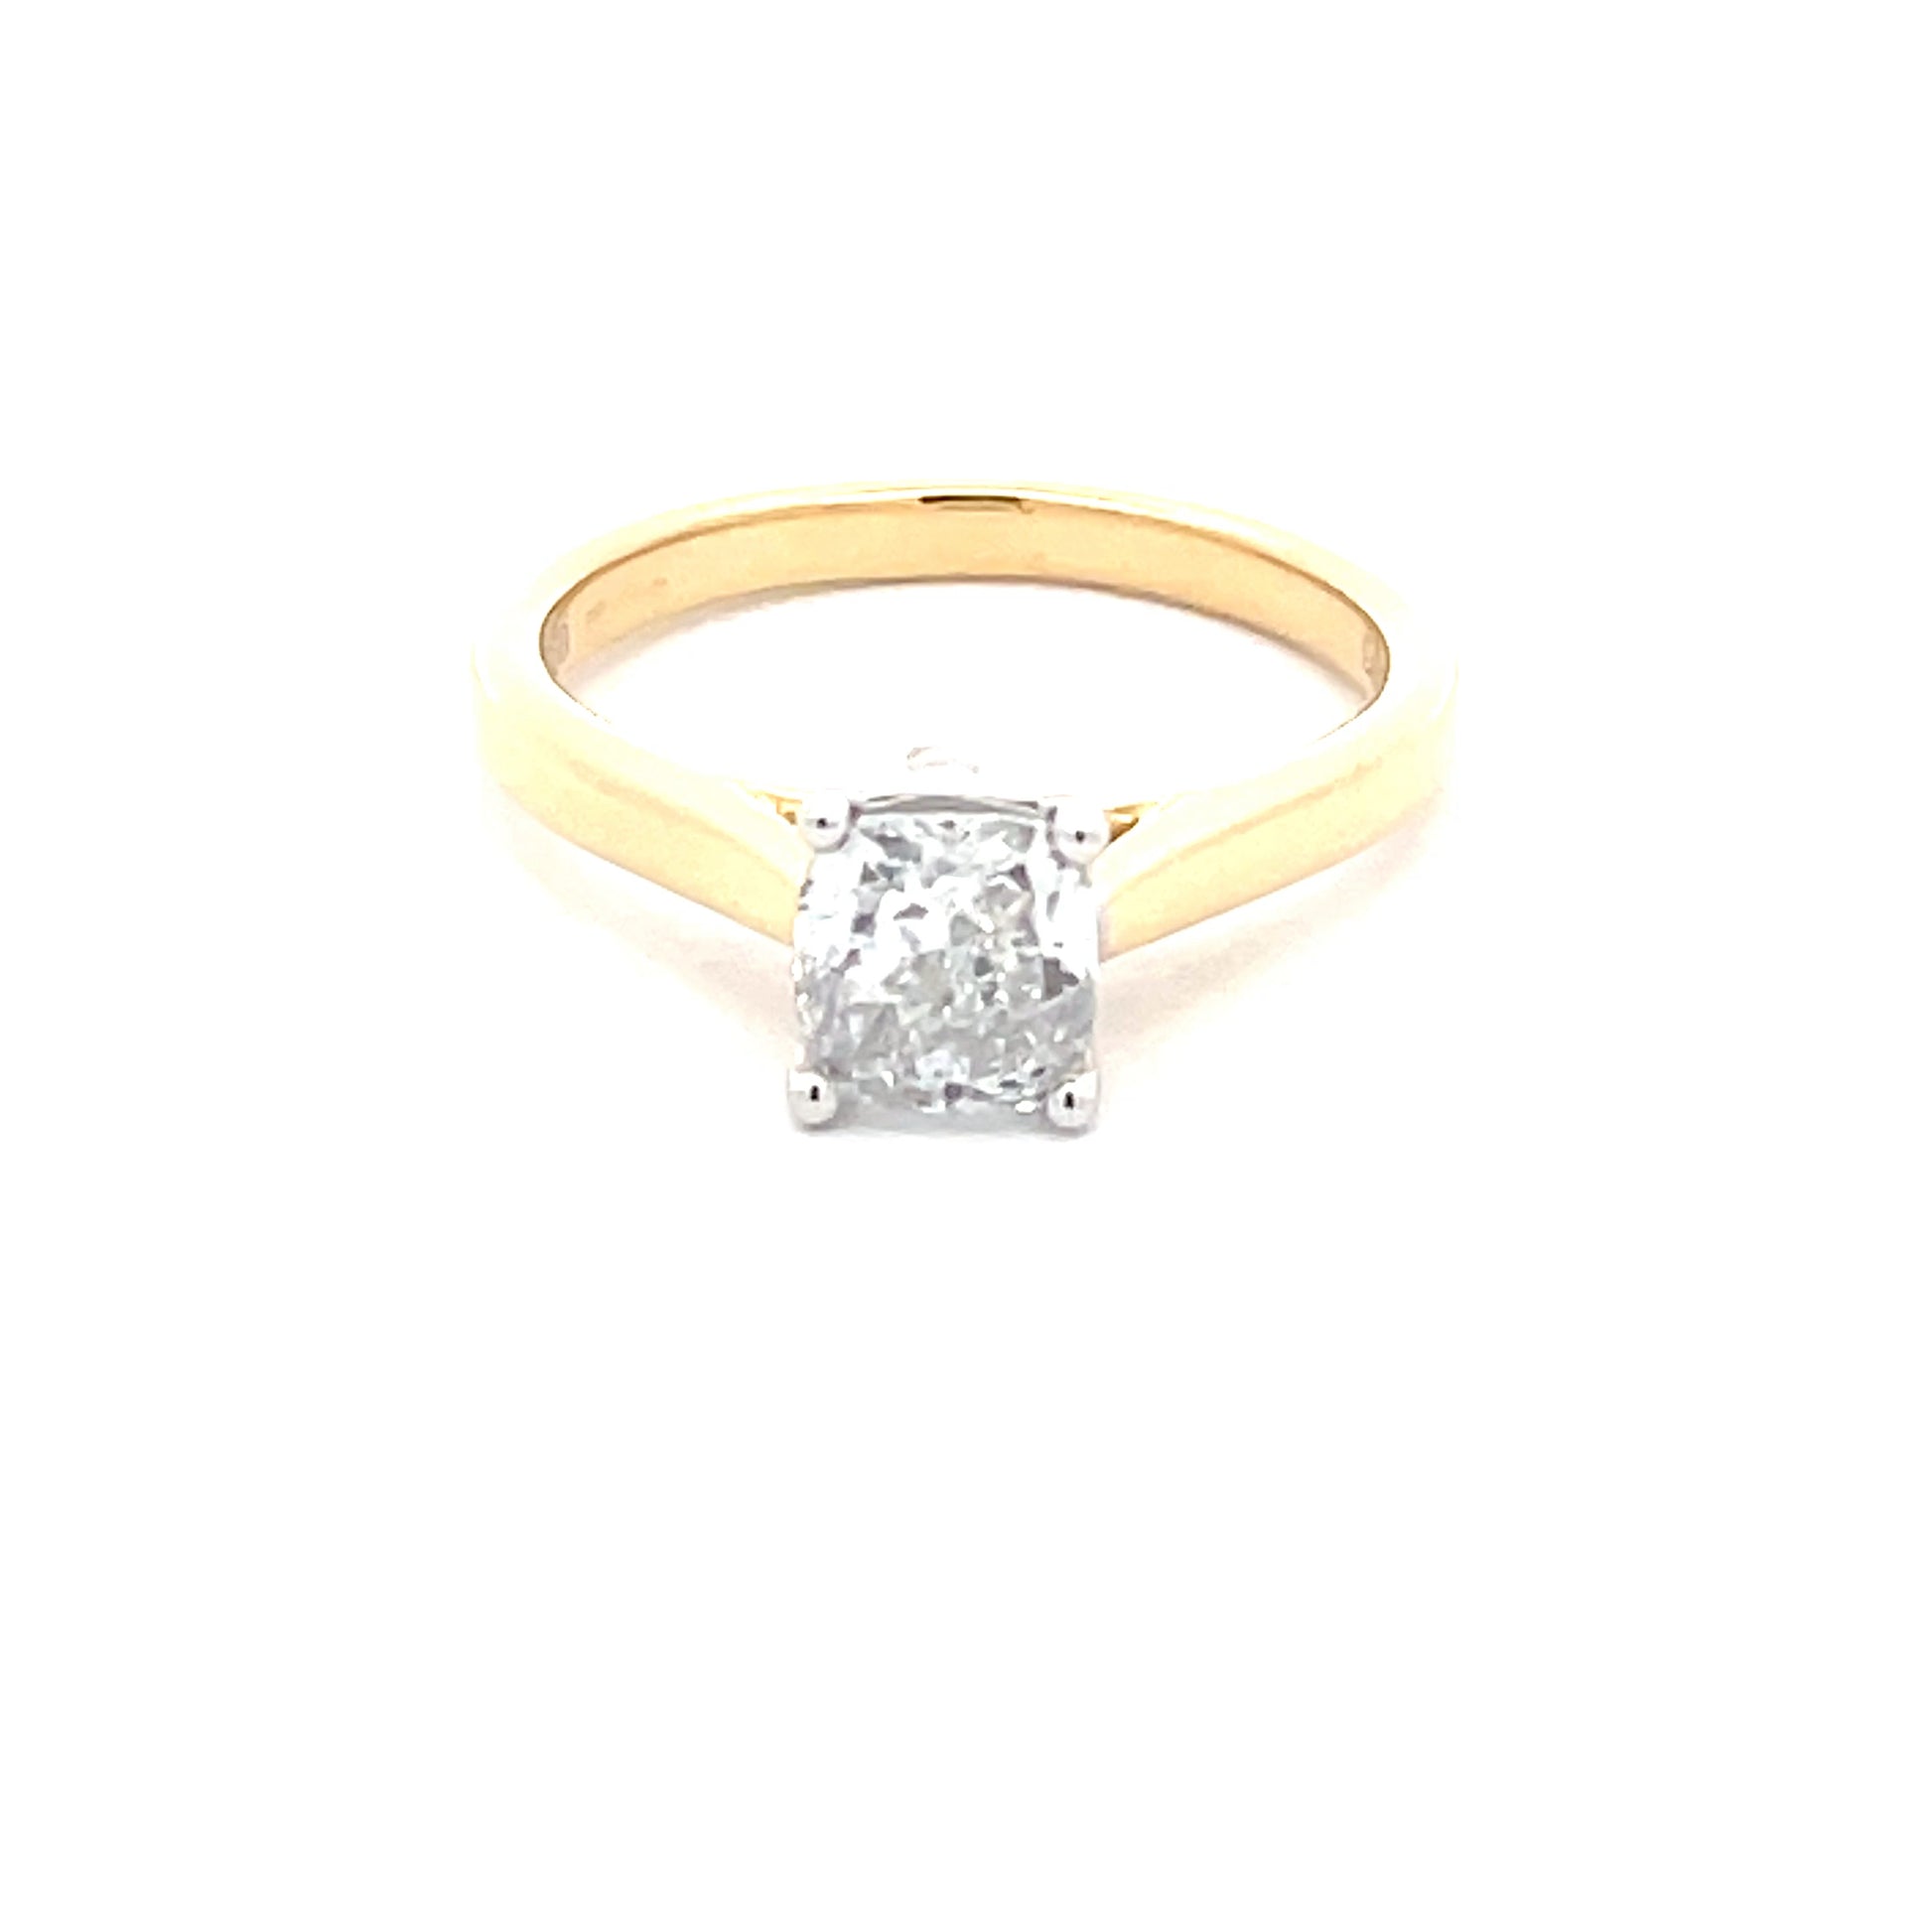 Cushion Shaped Diamond Solitaire Ring - 1.00cts  Gardiner Brothers   